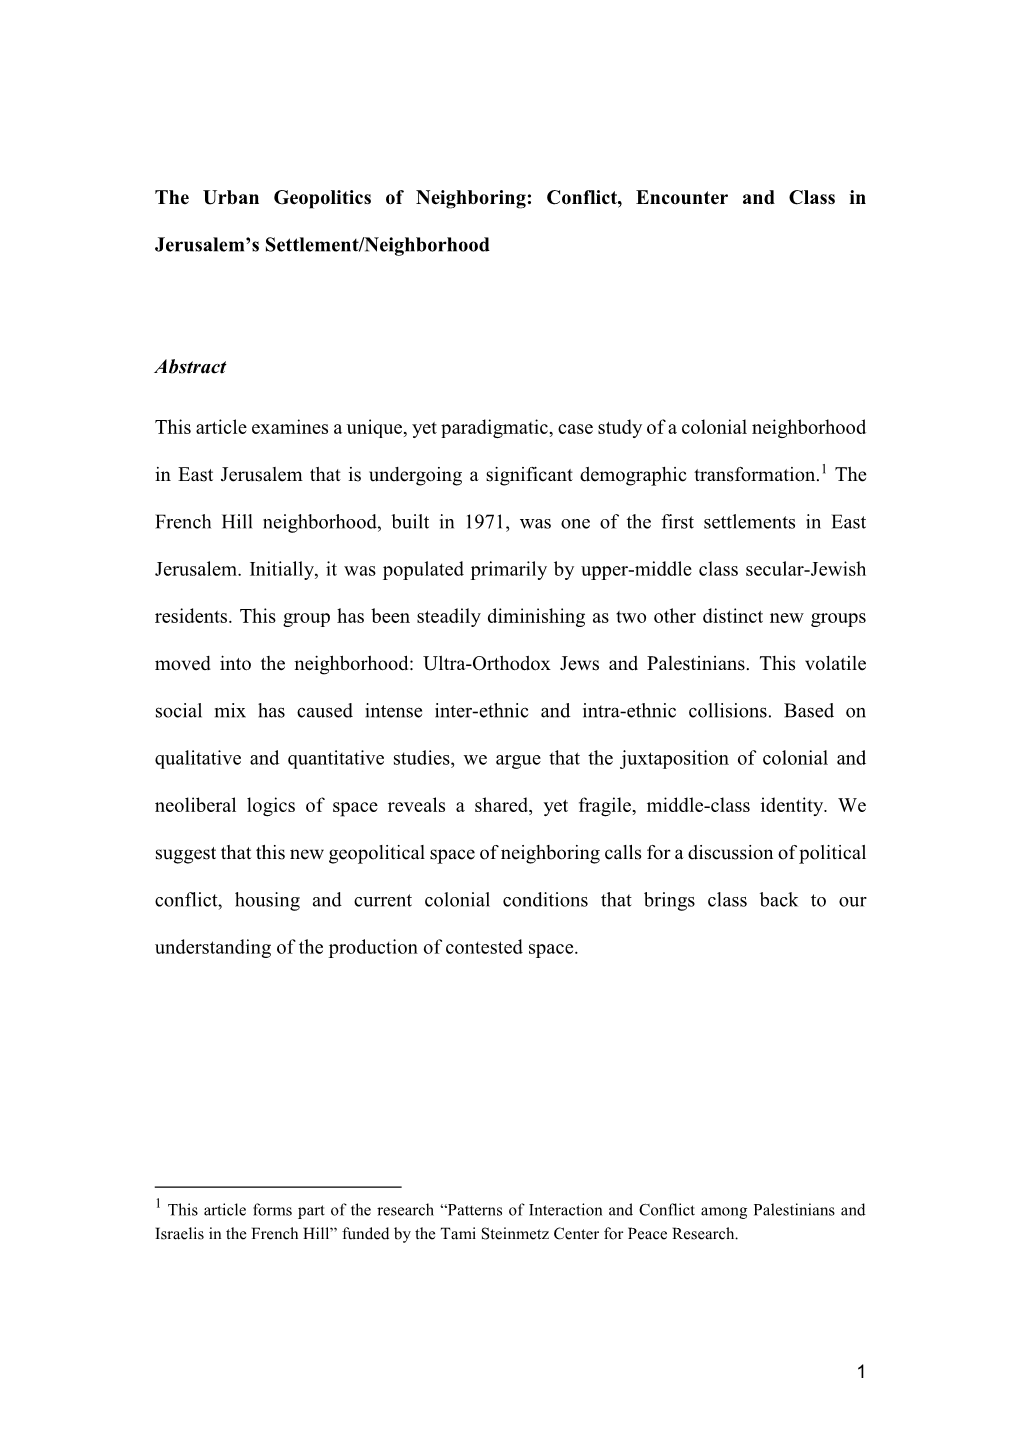 The Urban Geopolitics of Neighboring: Conflict, Encounter and Class In